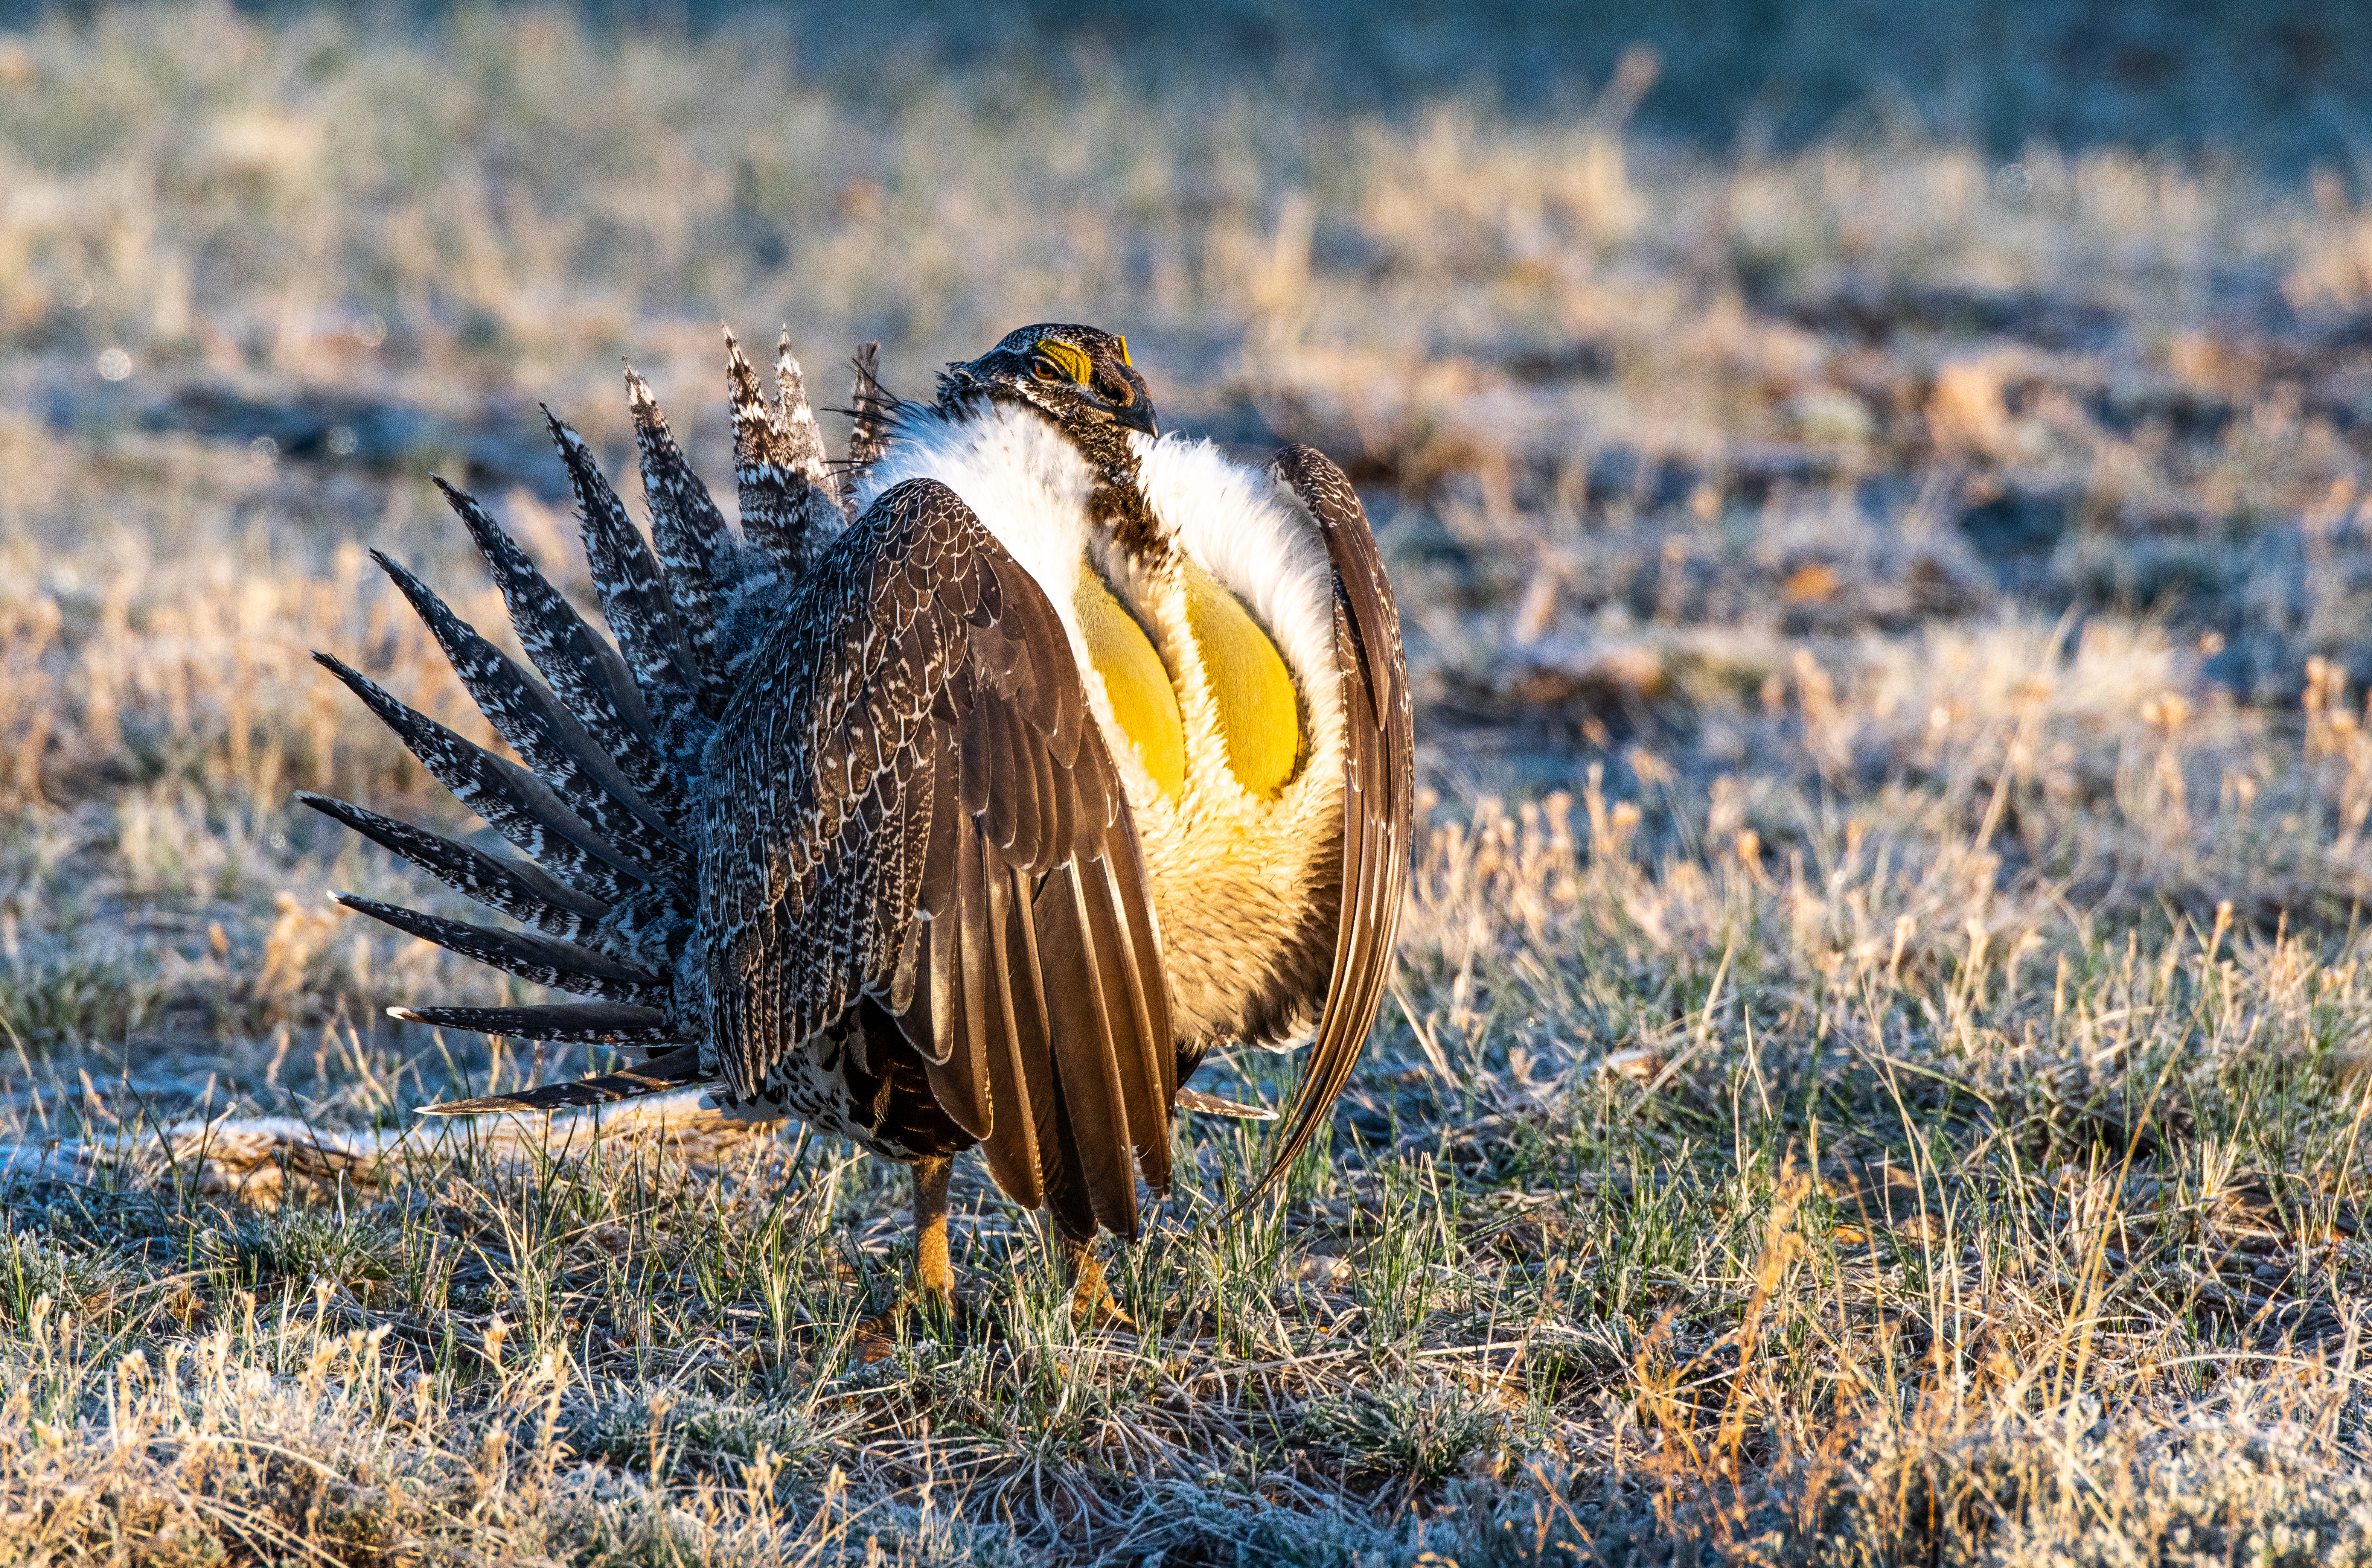 7 ways Trump’s environmental policies are affecting wildlife - grouse